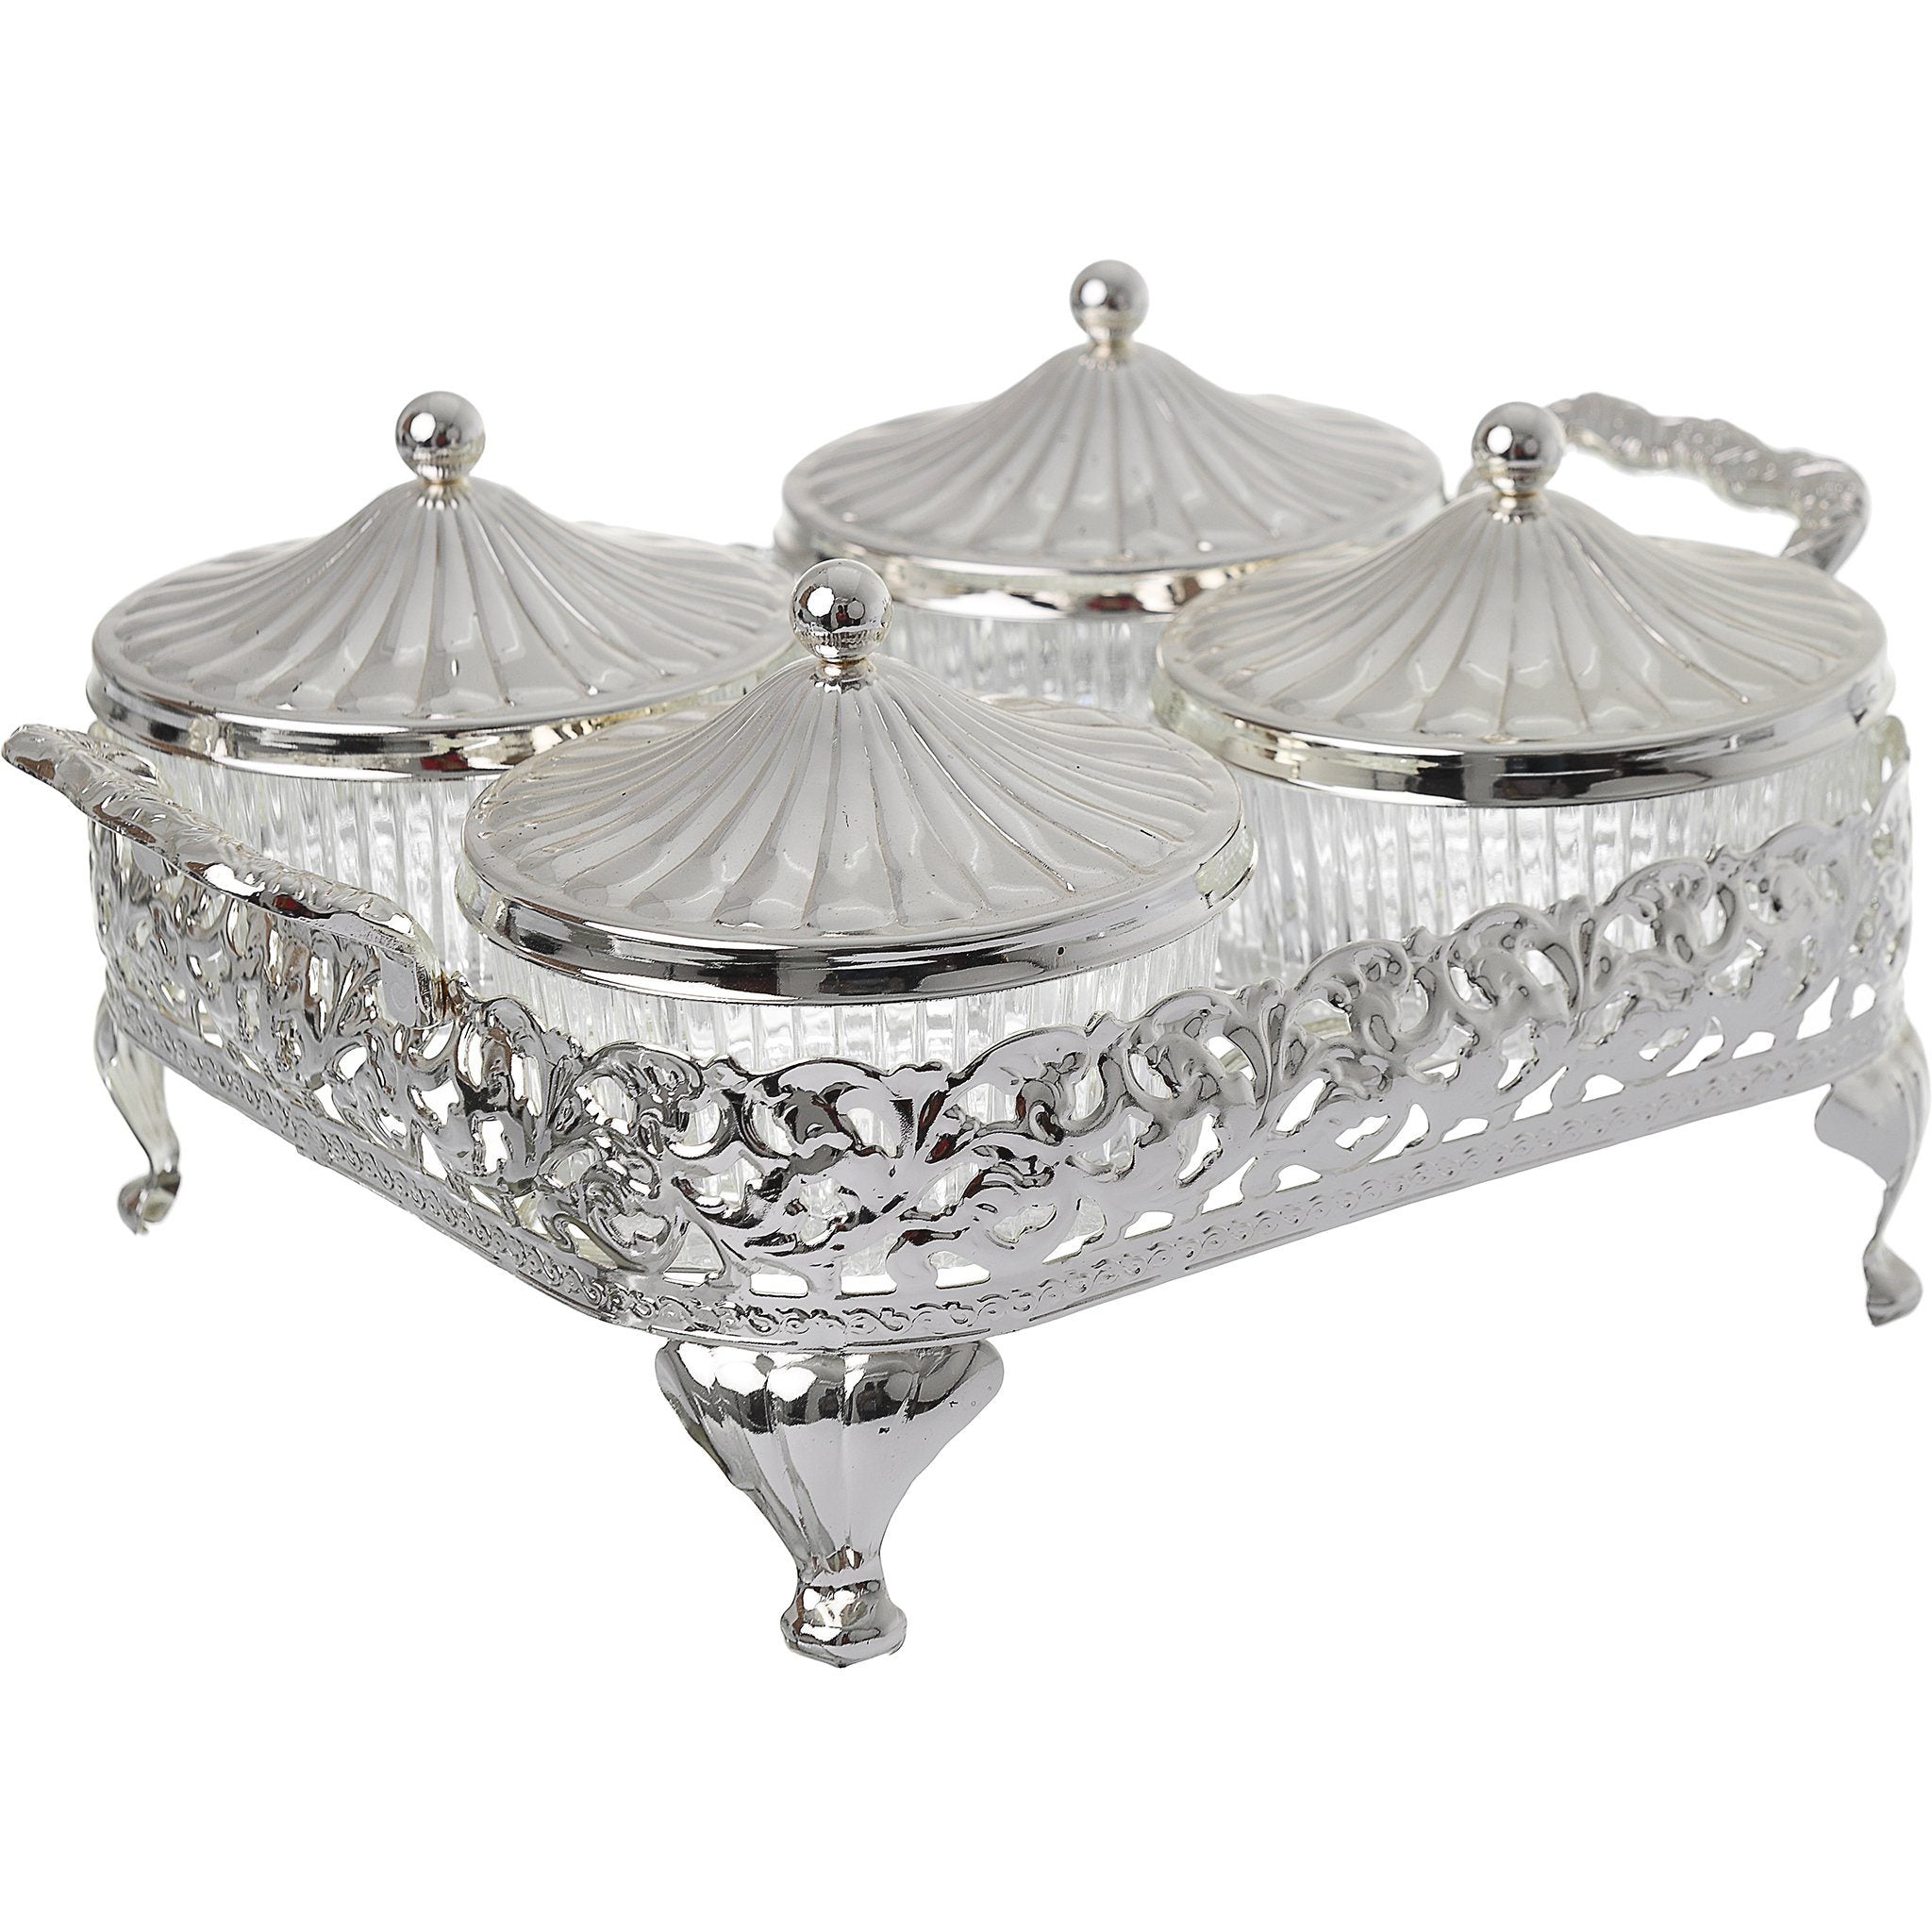 Queen Anne - Round Bowl Set with Silver Plated Stand 4 Pieces - Silver Plated Metal & Glass - 26x21cm - 26000420